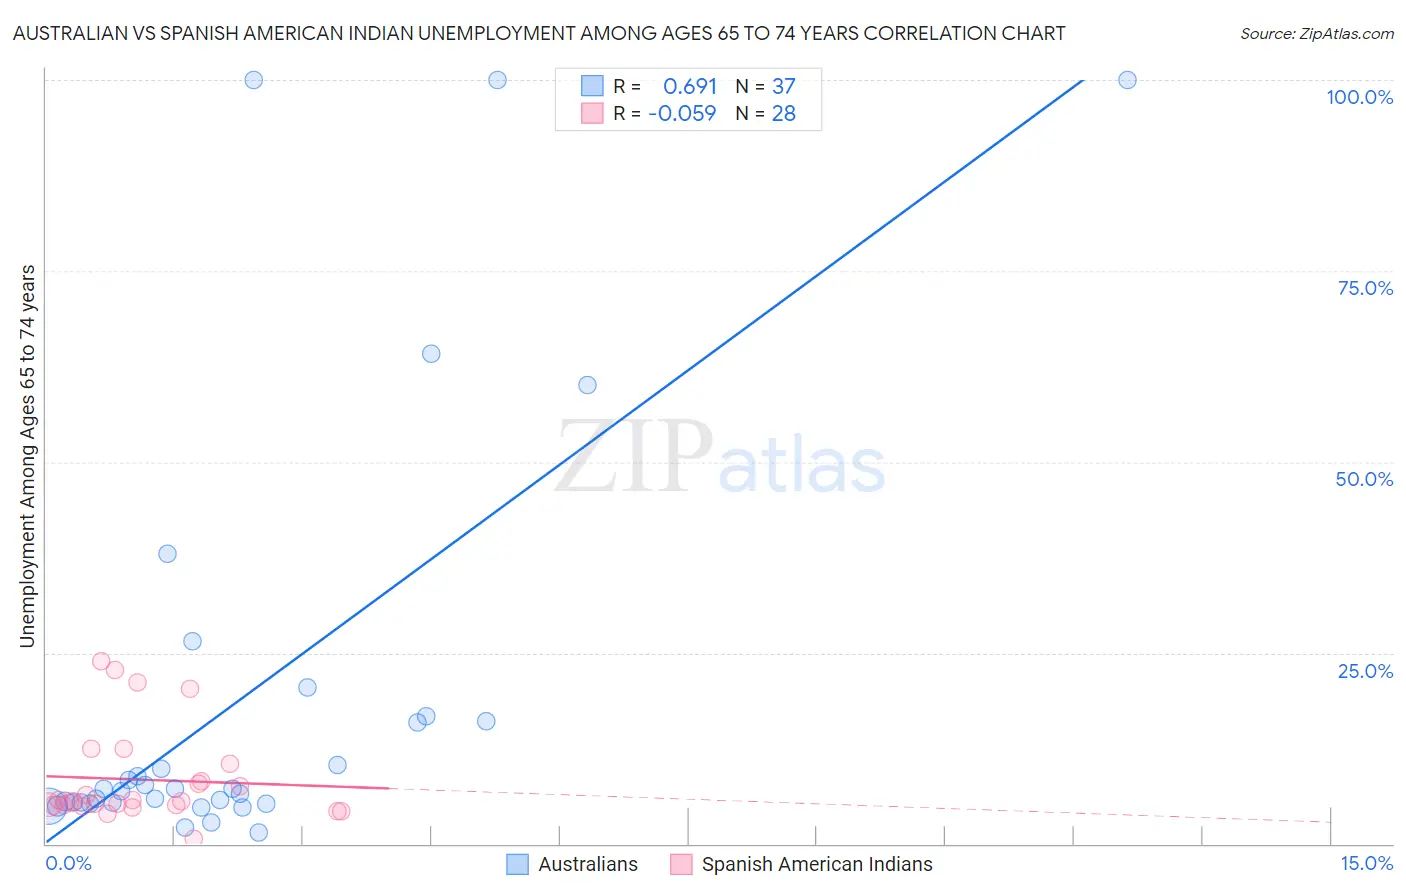 Australian vs Spanish American Indian Unemployment Among Ages 65 to 74 years